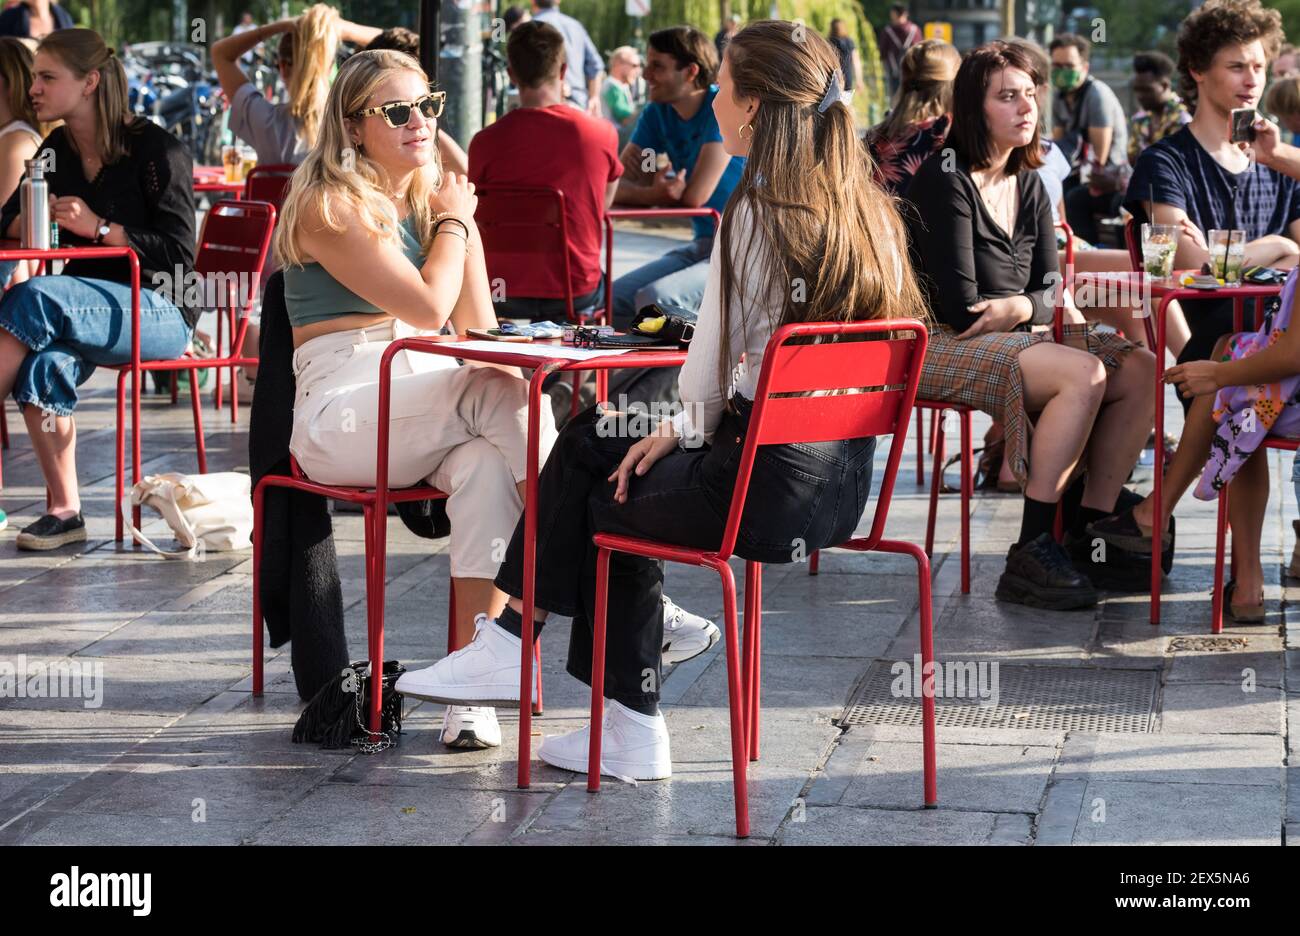 Ixelles, Brussels Capital Region / Belgium - 07 15 2020: Young people enjoying a sunny terrace at the Flagey square with friends Stock Photo